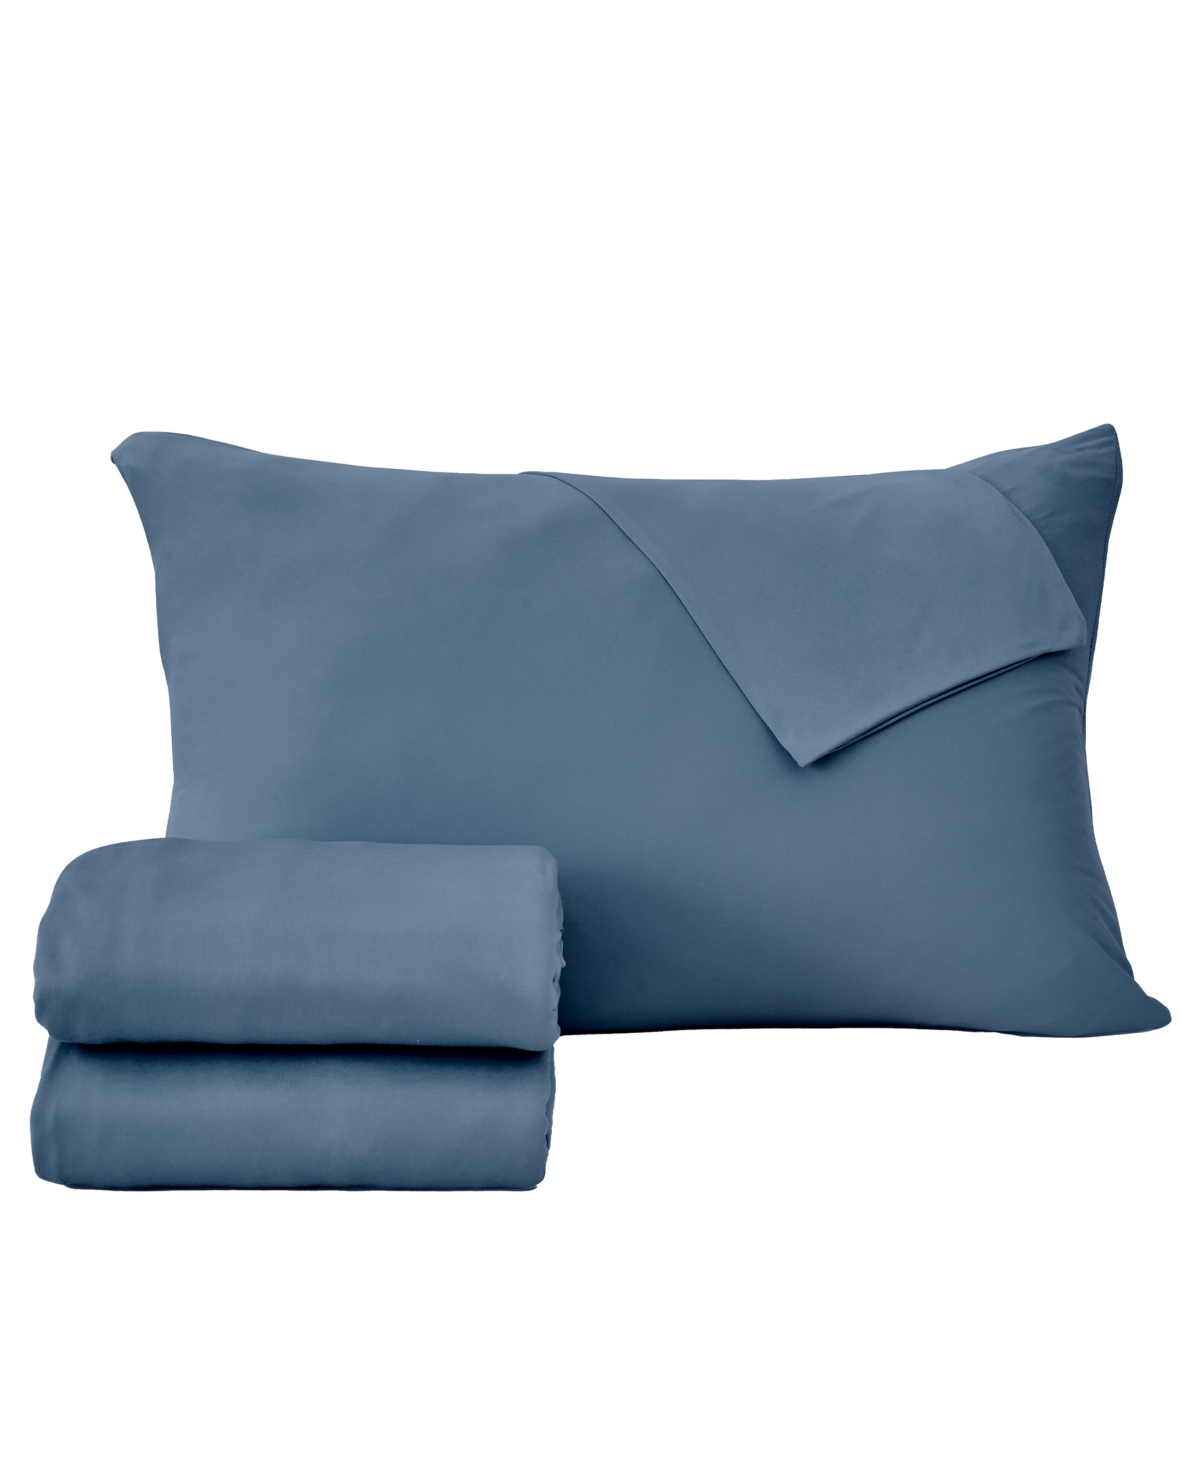 Shop Premium Comforts Performance Cooling Super Soft Polyester 4 Piece Sheet Set, Full In Oceana